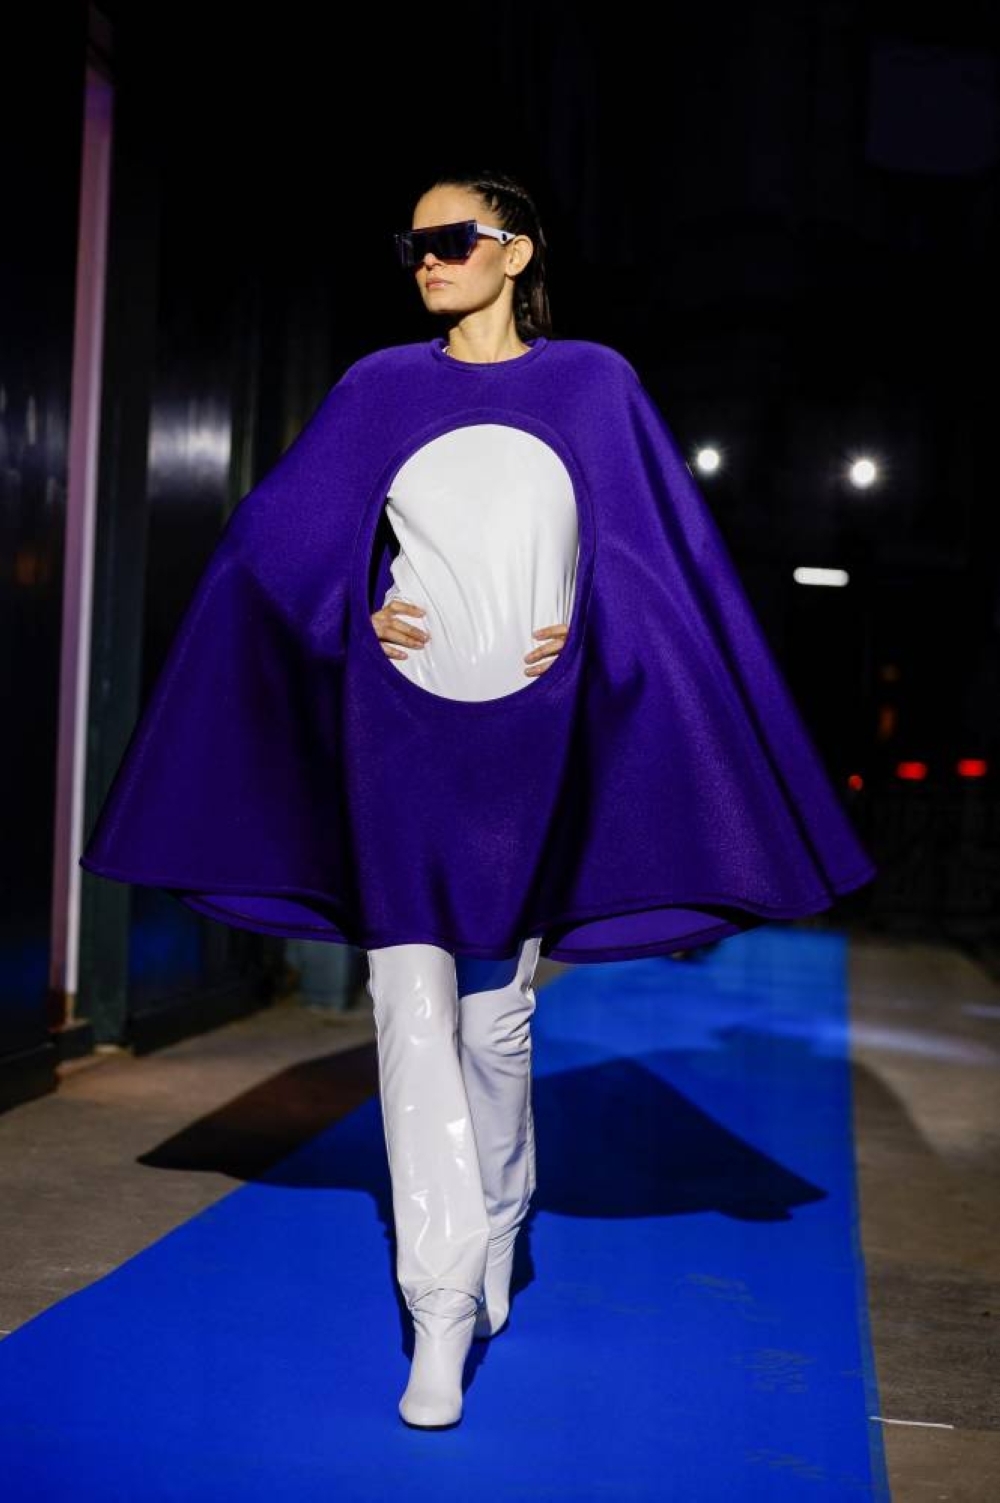 A model presents a creation of Pierre Cardin Fall-Winter 2023/2024 Women's ready-to-wear collection show during Paris Fashion Week in Paris, France, March 5, 2023. REUTERS/Sarah Meyssonnier